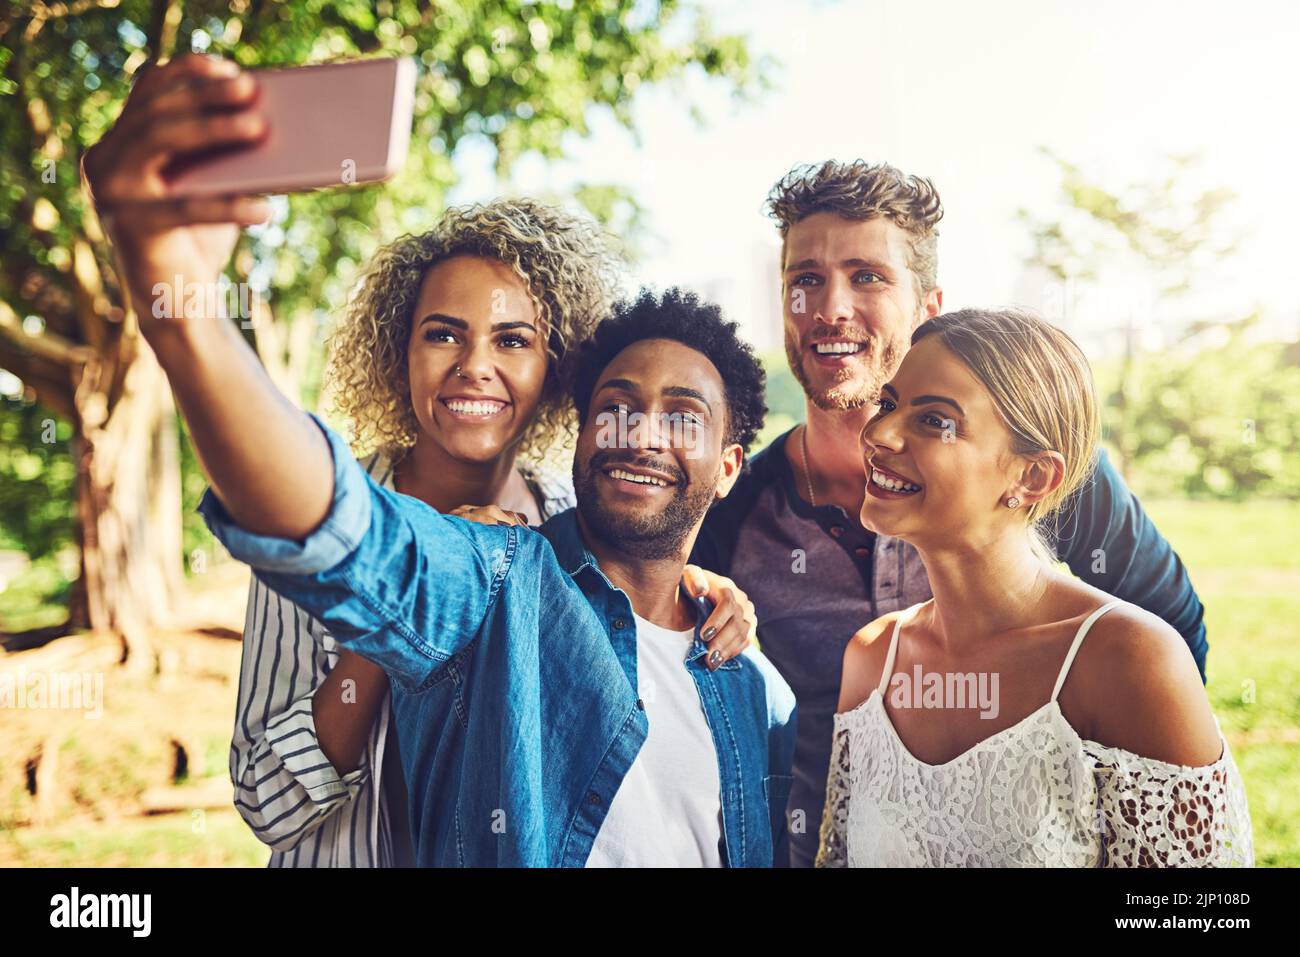 Our double date is going great. two happy young couples taking a selfie together outdoors. Stock Photo